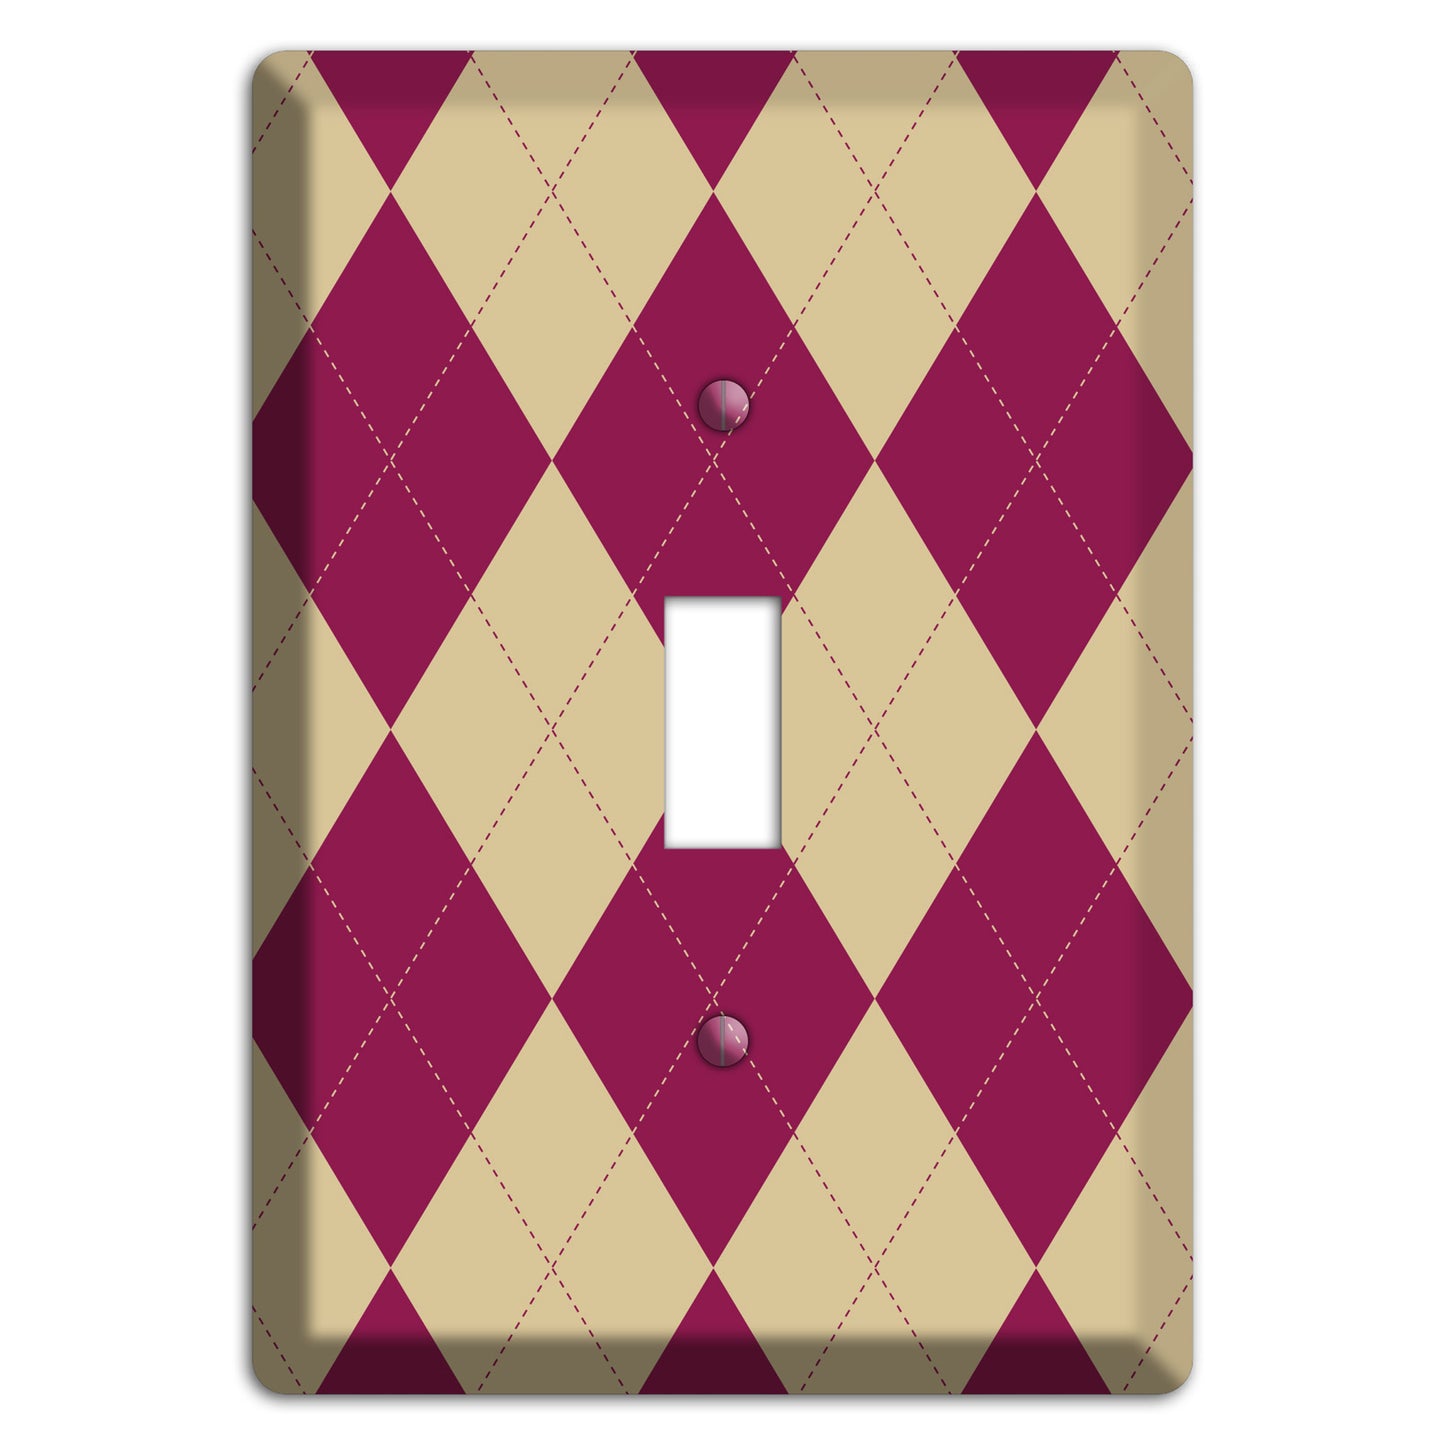 Red and Tan Argyle Cover Plates